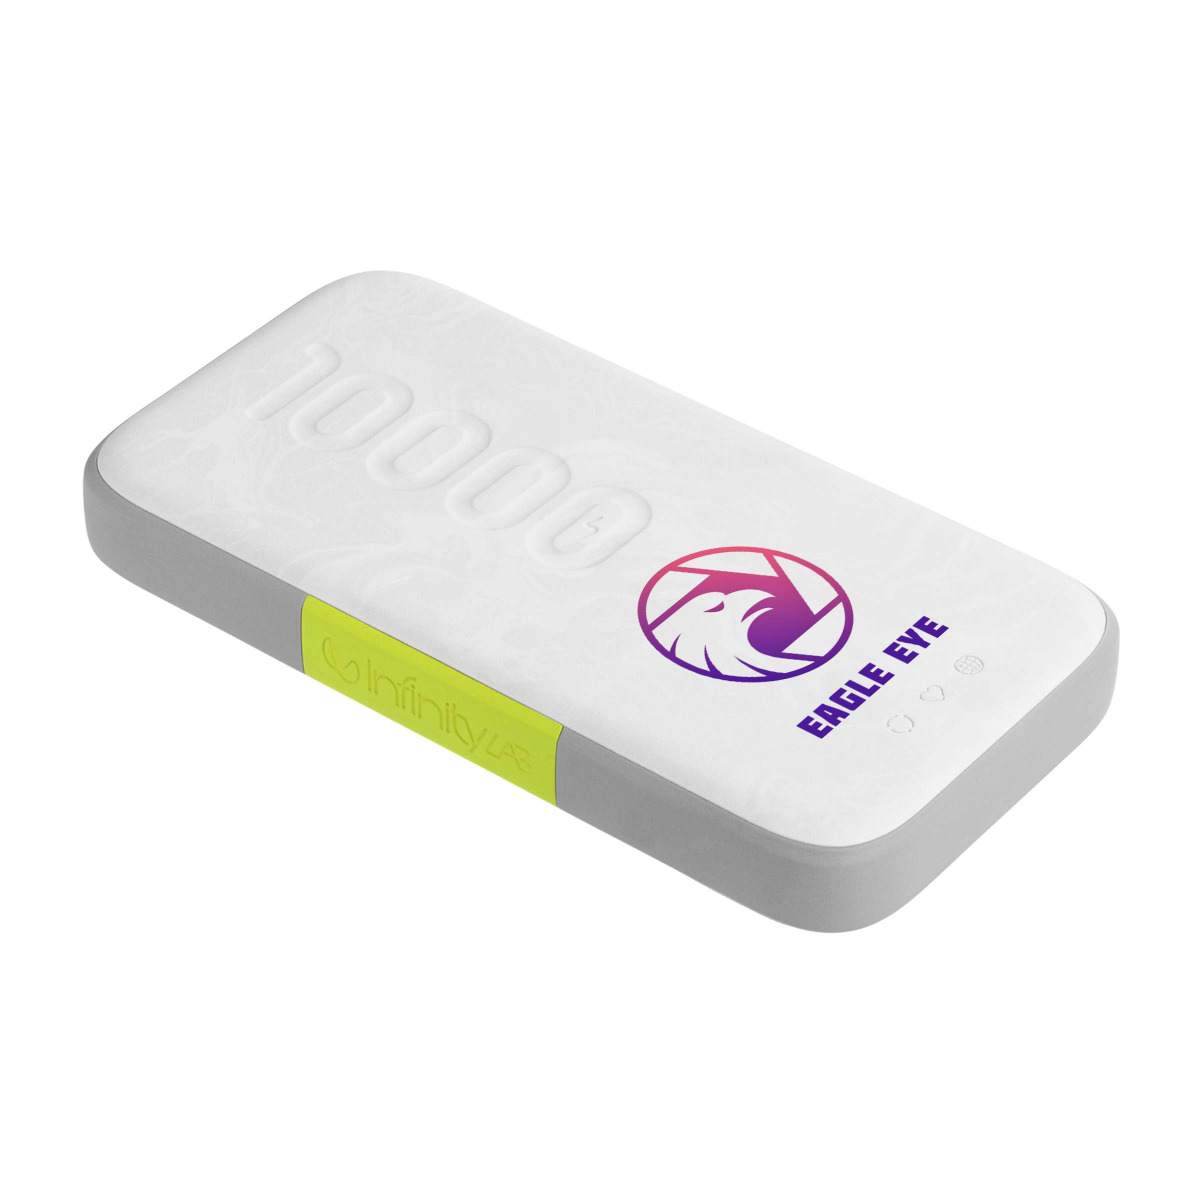 InfinityLab InstantGo 10000 Wireless - Personalisation with a full colour print and sleeve